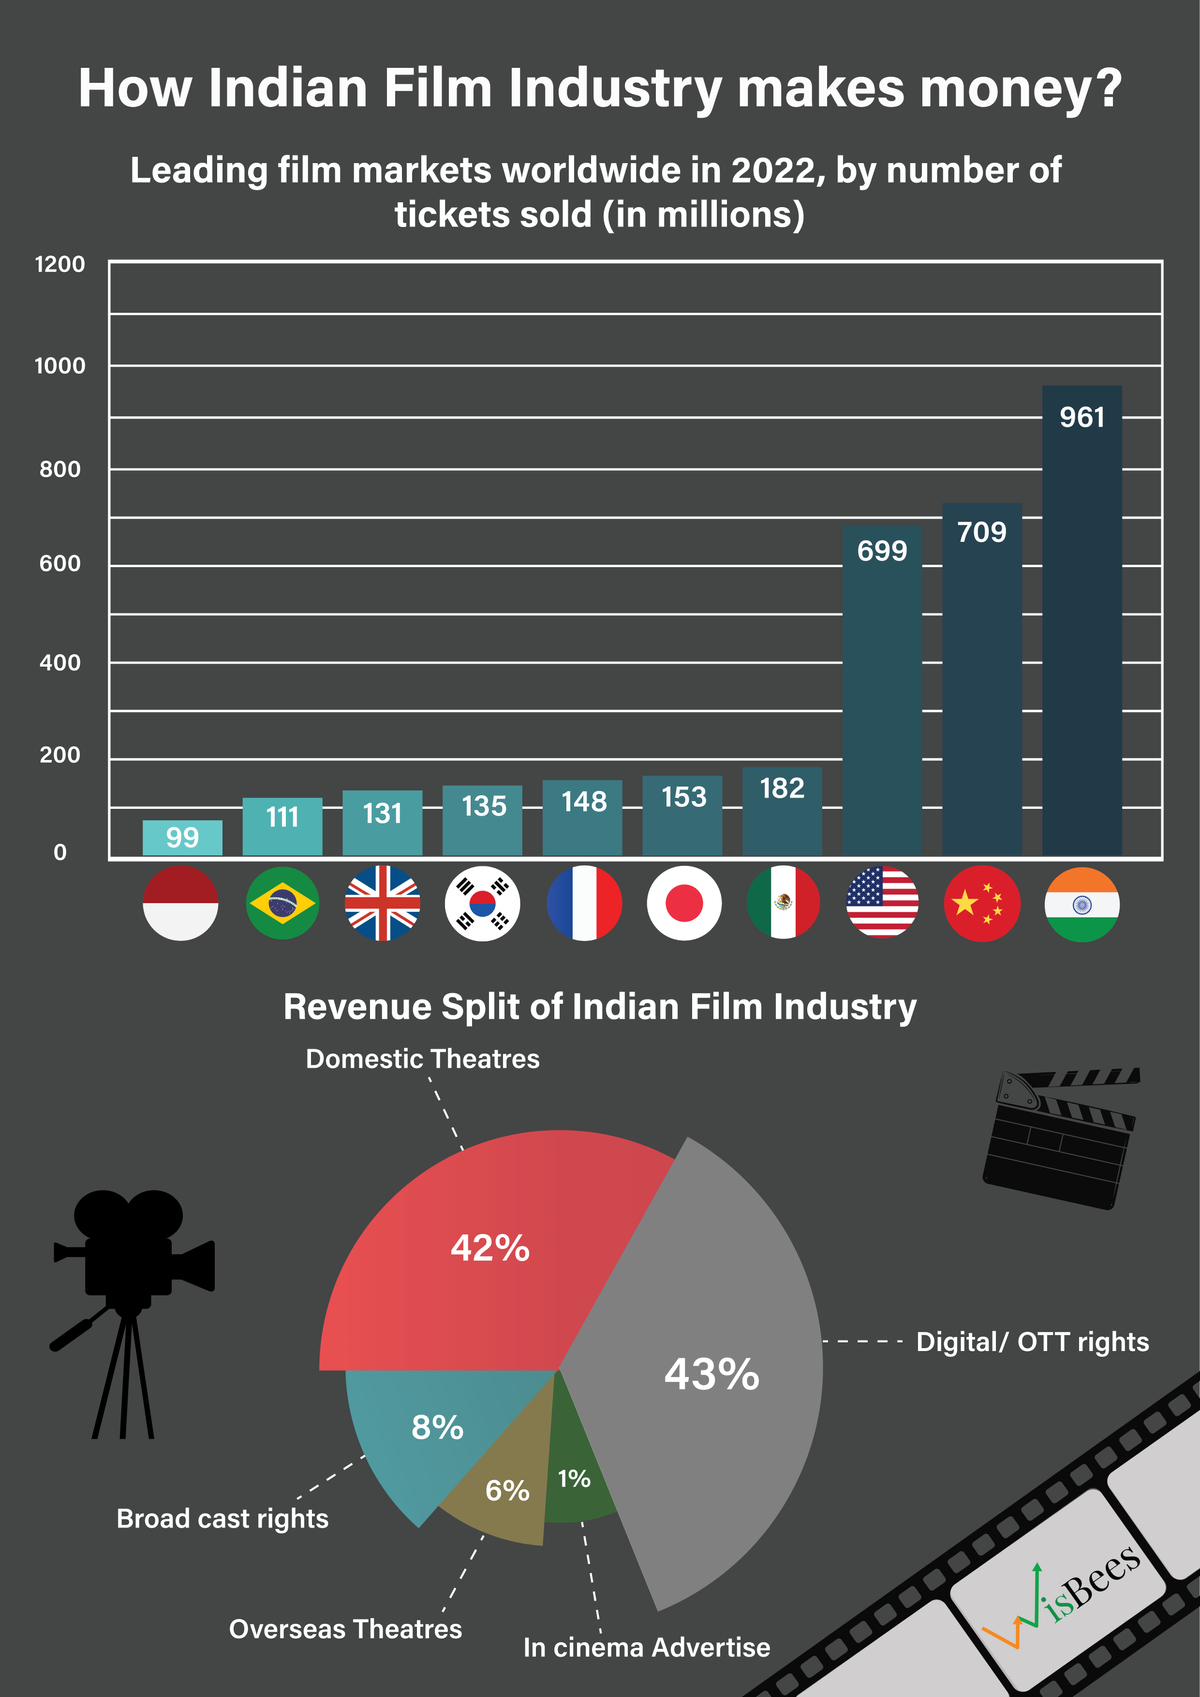 How does the Indian Film Industry Make Money?